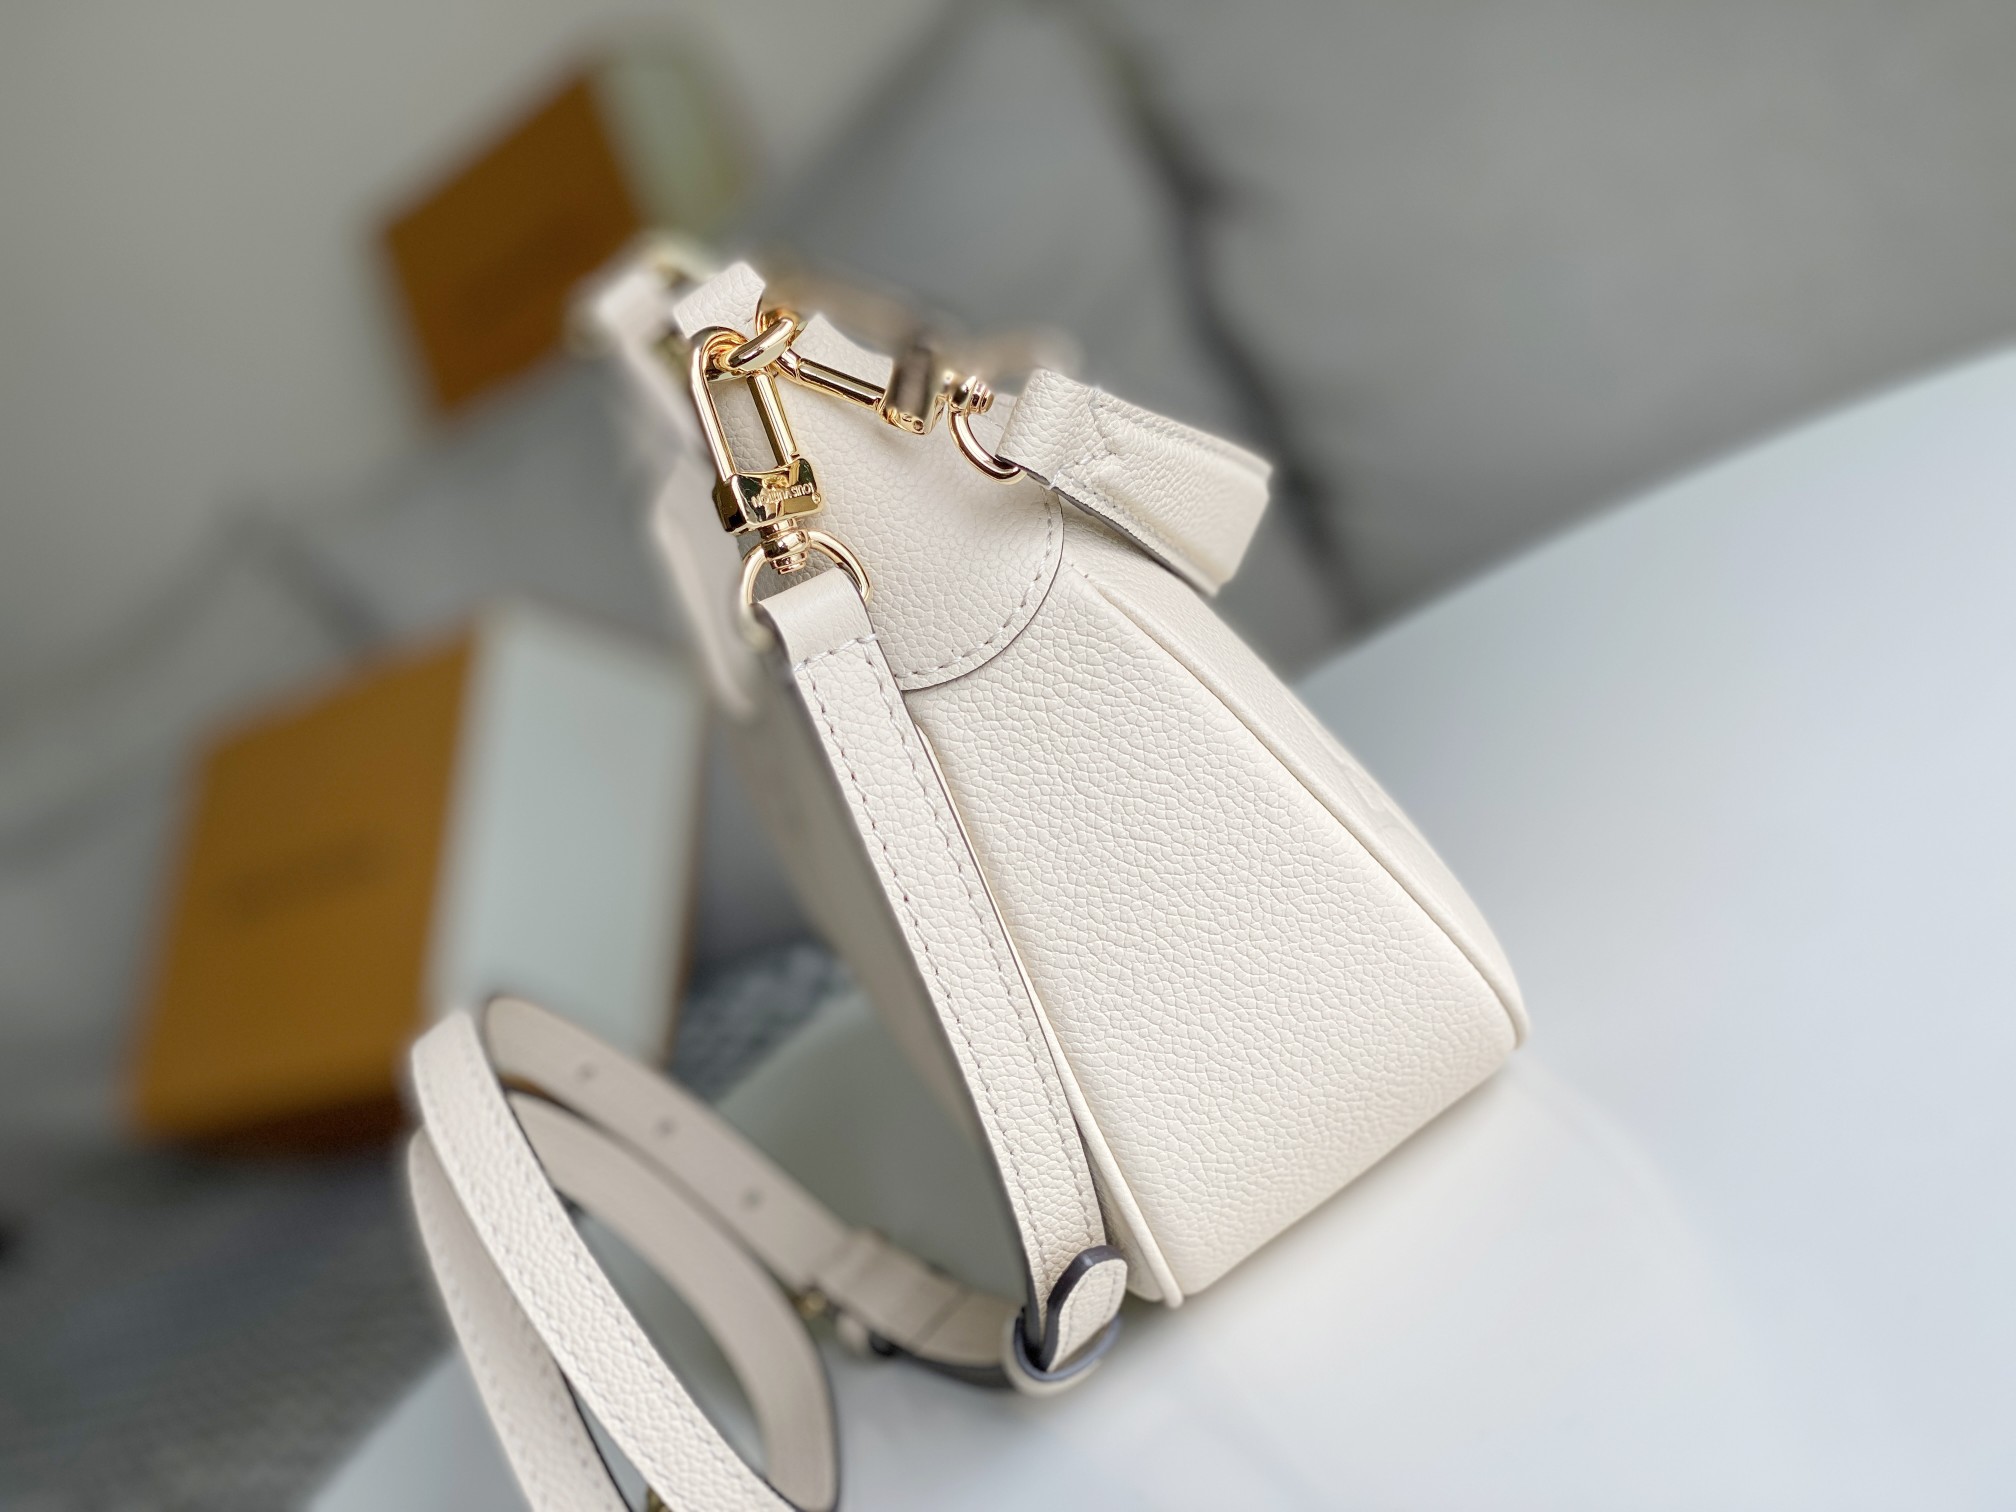 REAL LEATHER Louis Vuitton Bagatelle Cream M46099 TOP QUALITY, 1:1 Rep lica  from Suplook， Contact Whatsapp at +8618559333945 to make an order or check  details. Wholesale and retail worldwide. : r/Suplookbag